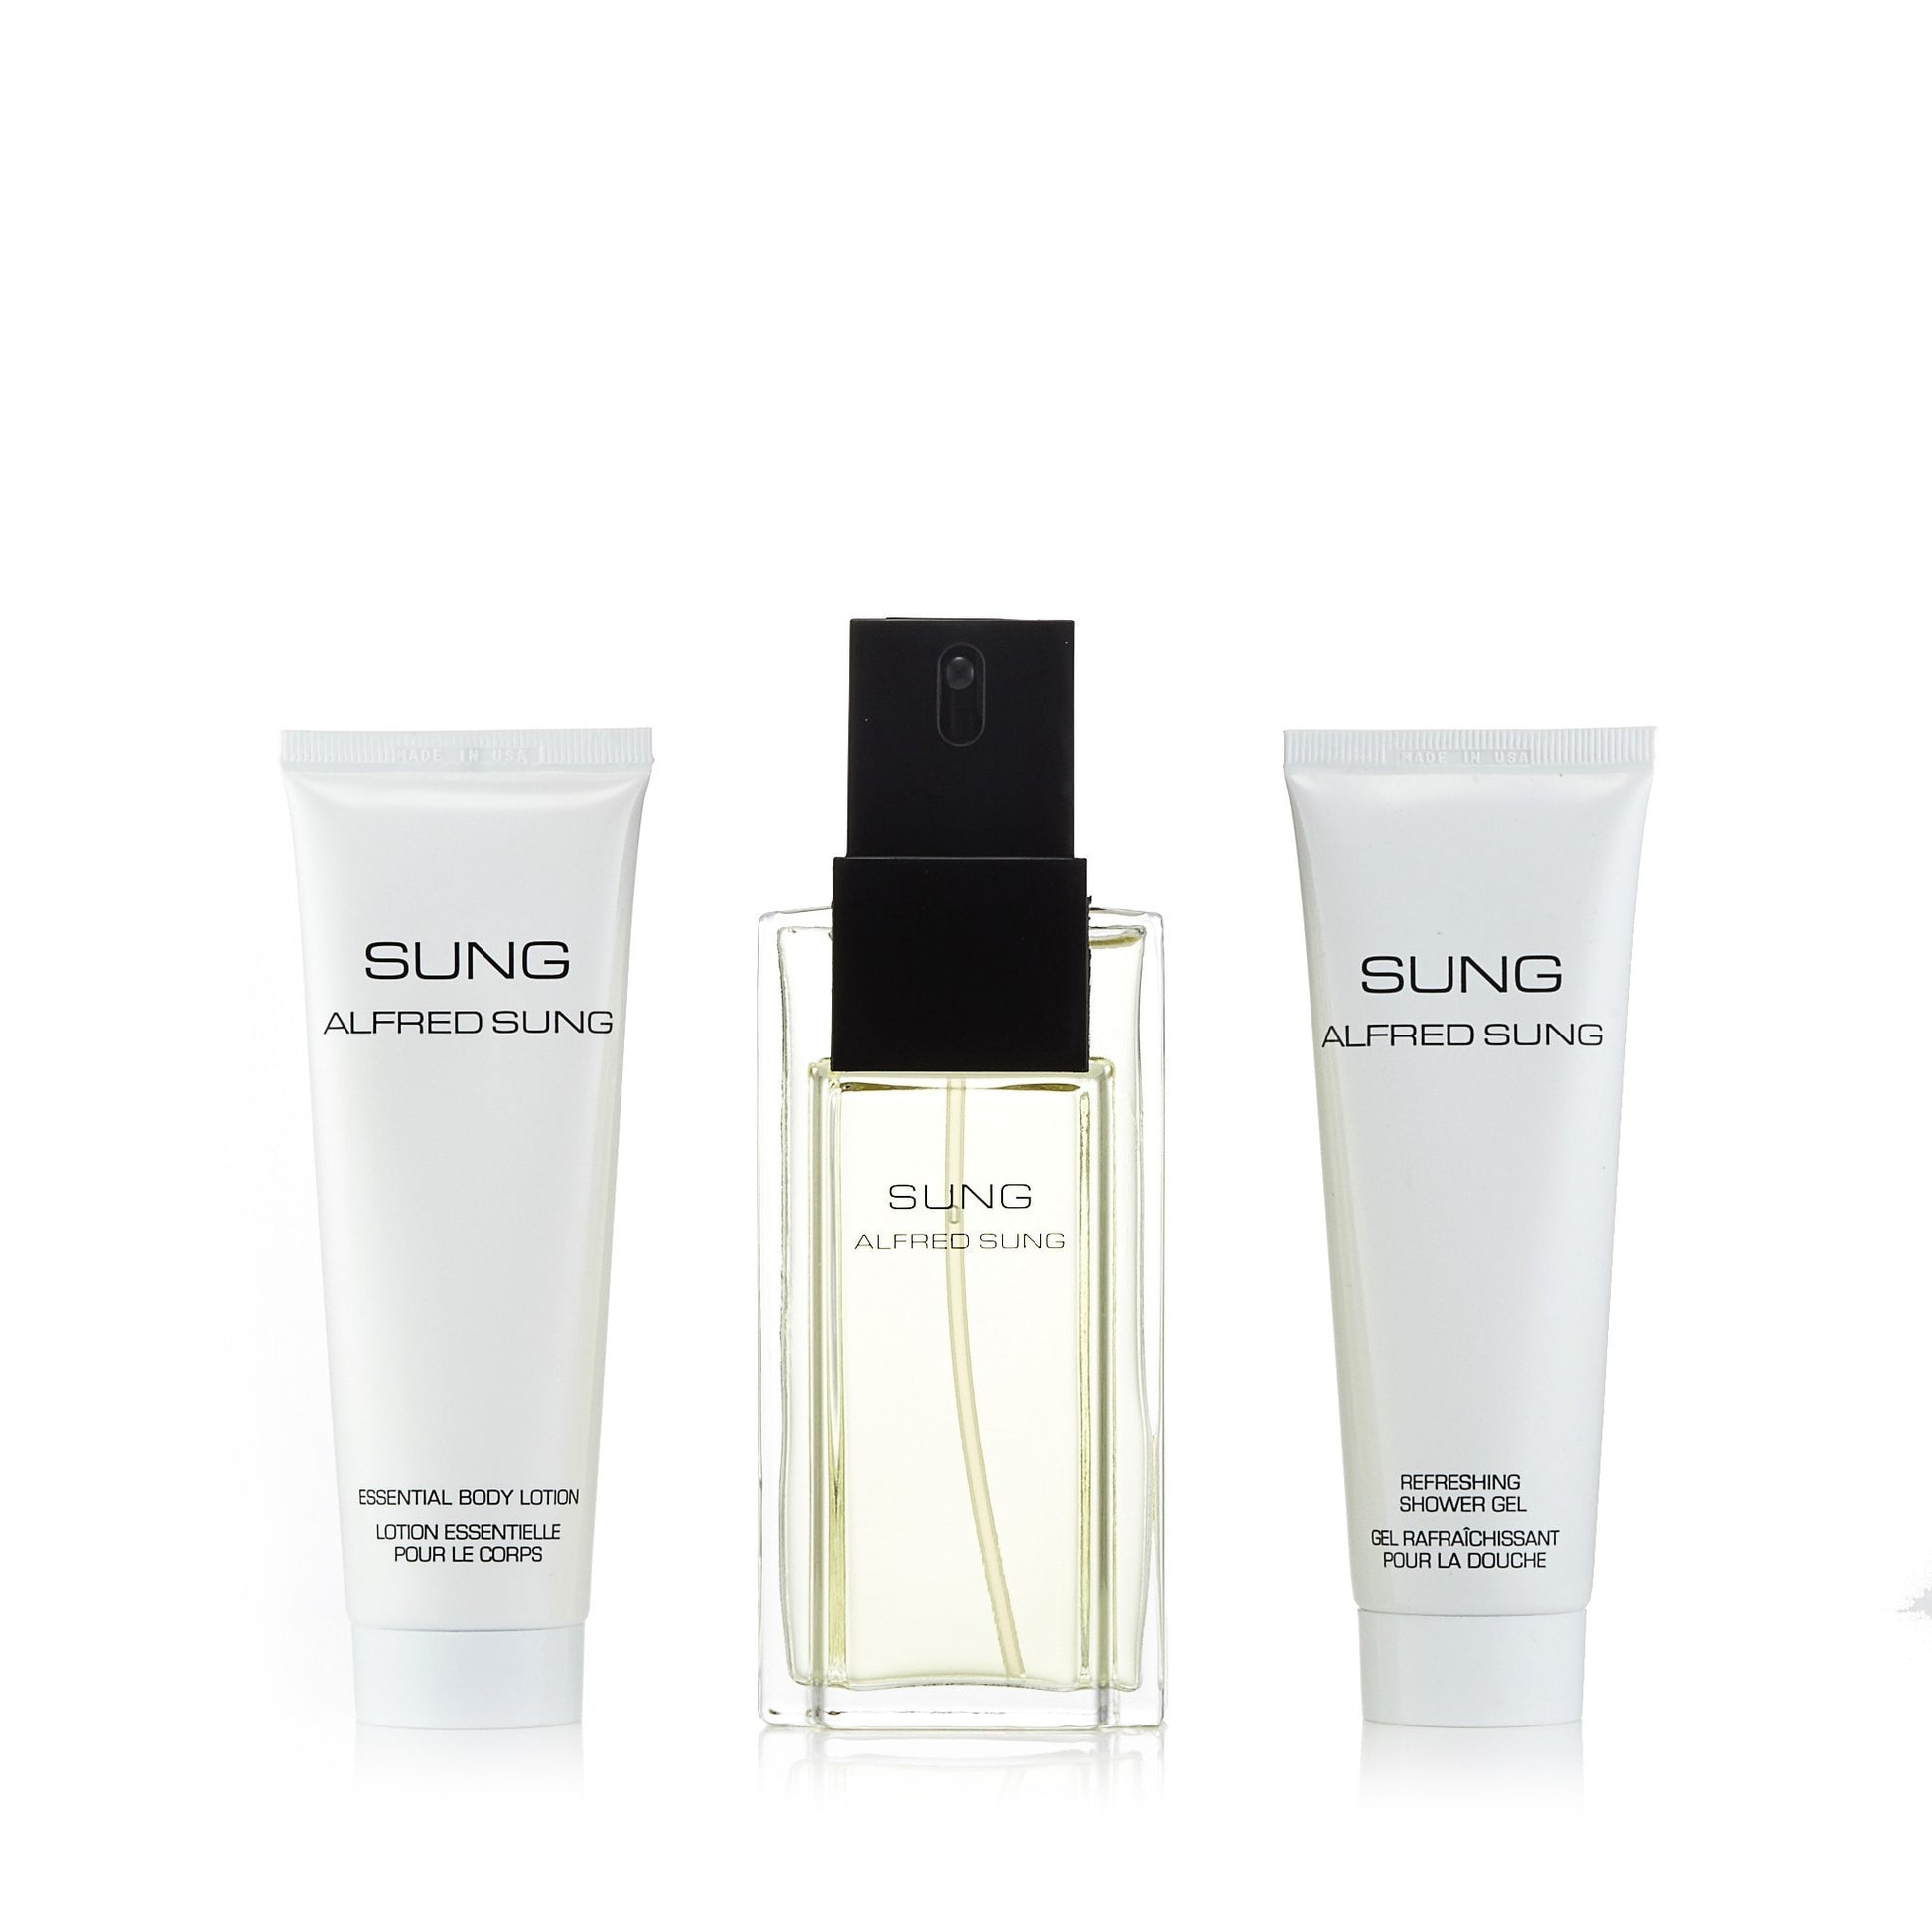 Alfred Sung Gift Set for Women by Alfred Sung 3.4 oz. Click to open in modal